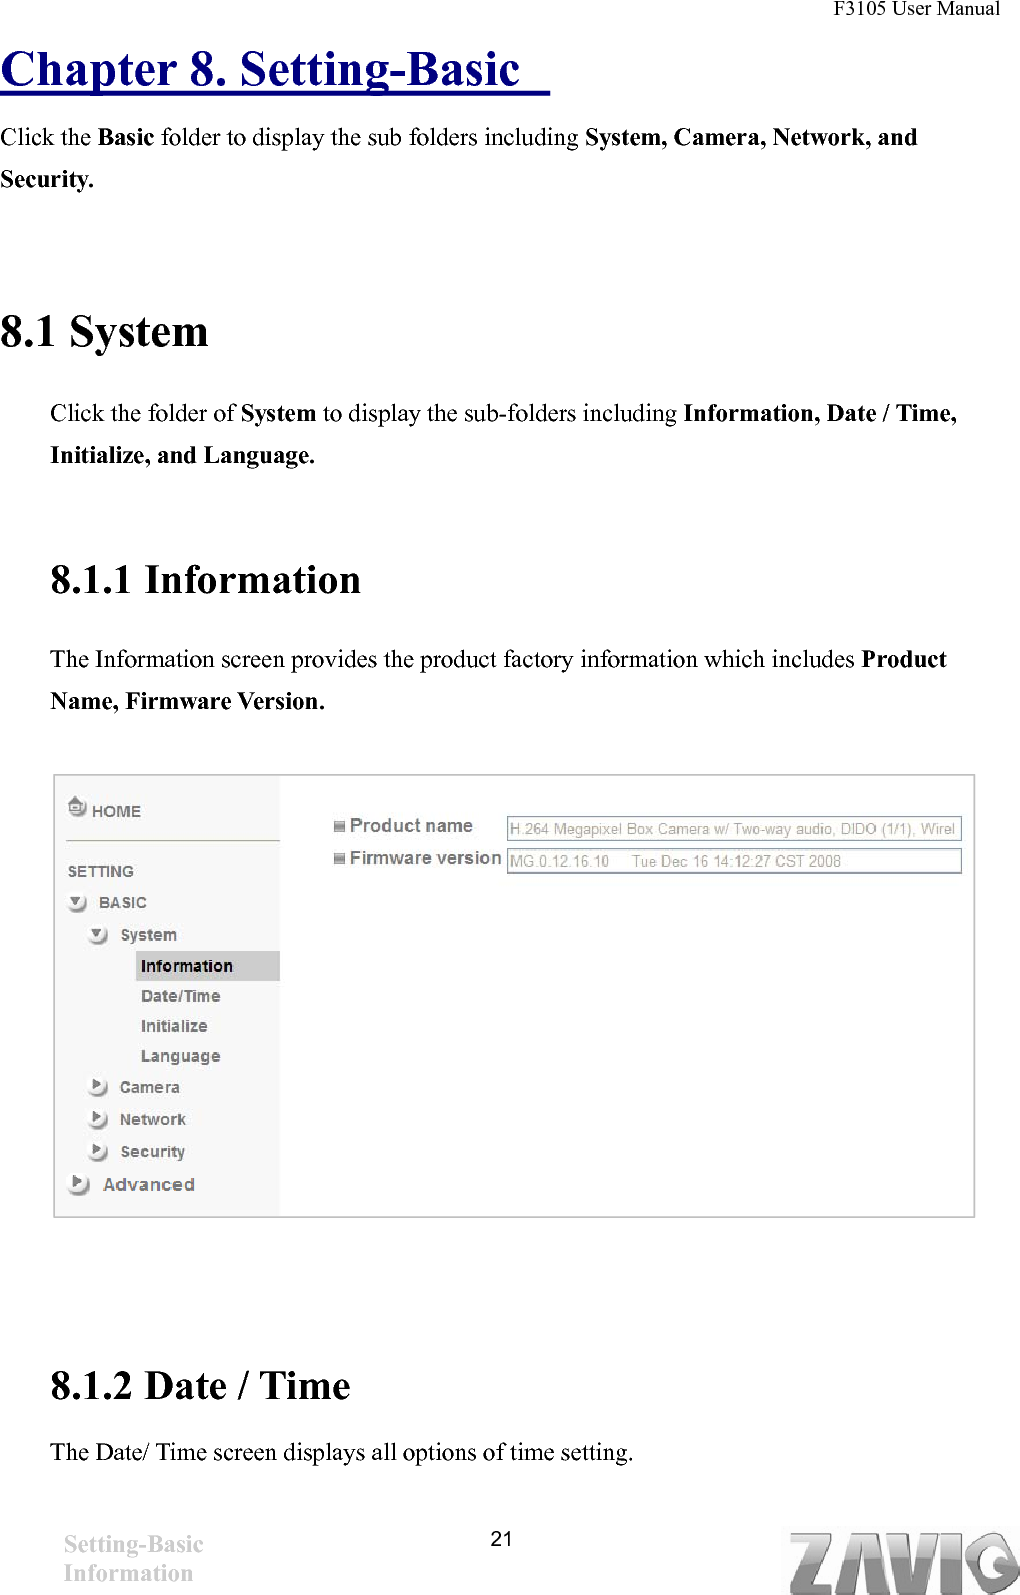 F3105 User Manual   Chapter 8. Setting-Basic   Click the Basic folder to display the sub folders including System, Camera, Network, and Security.  8.1 System Click the folder of System to display the sub-folders including Information, Date / Time, Initialize, and Language.  8.1.1 Information The Information screen provides the product factory information which includes Product Name, Firmware Version.       21   8.1.2 Date / Time The Date/ Time screen displays all options of time setting.   Setting-Basic Information 